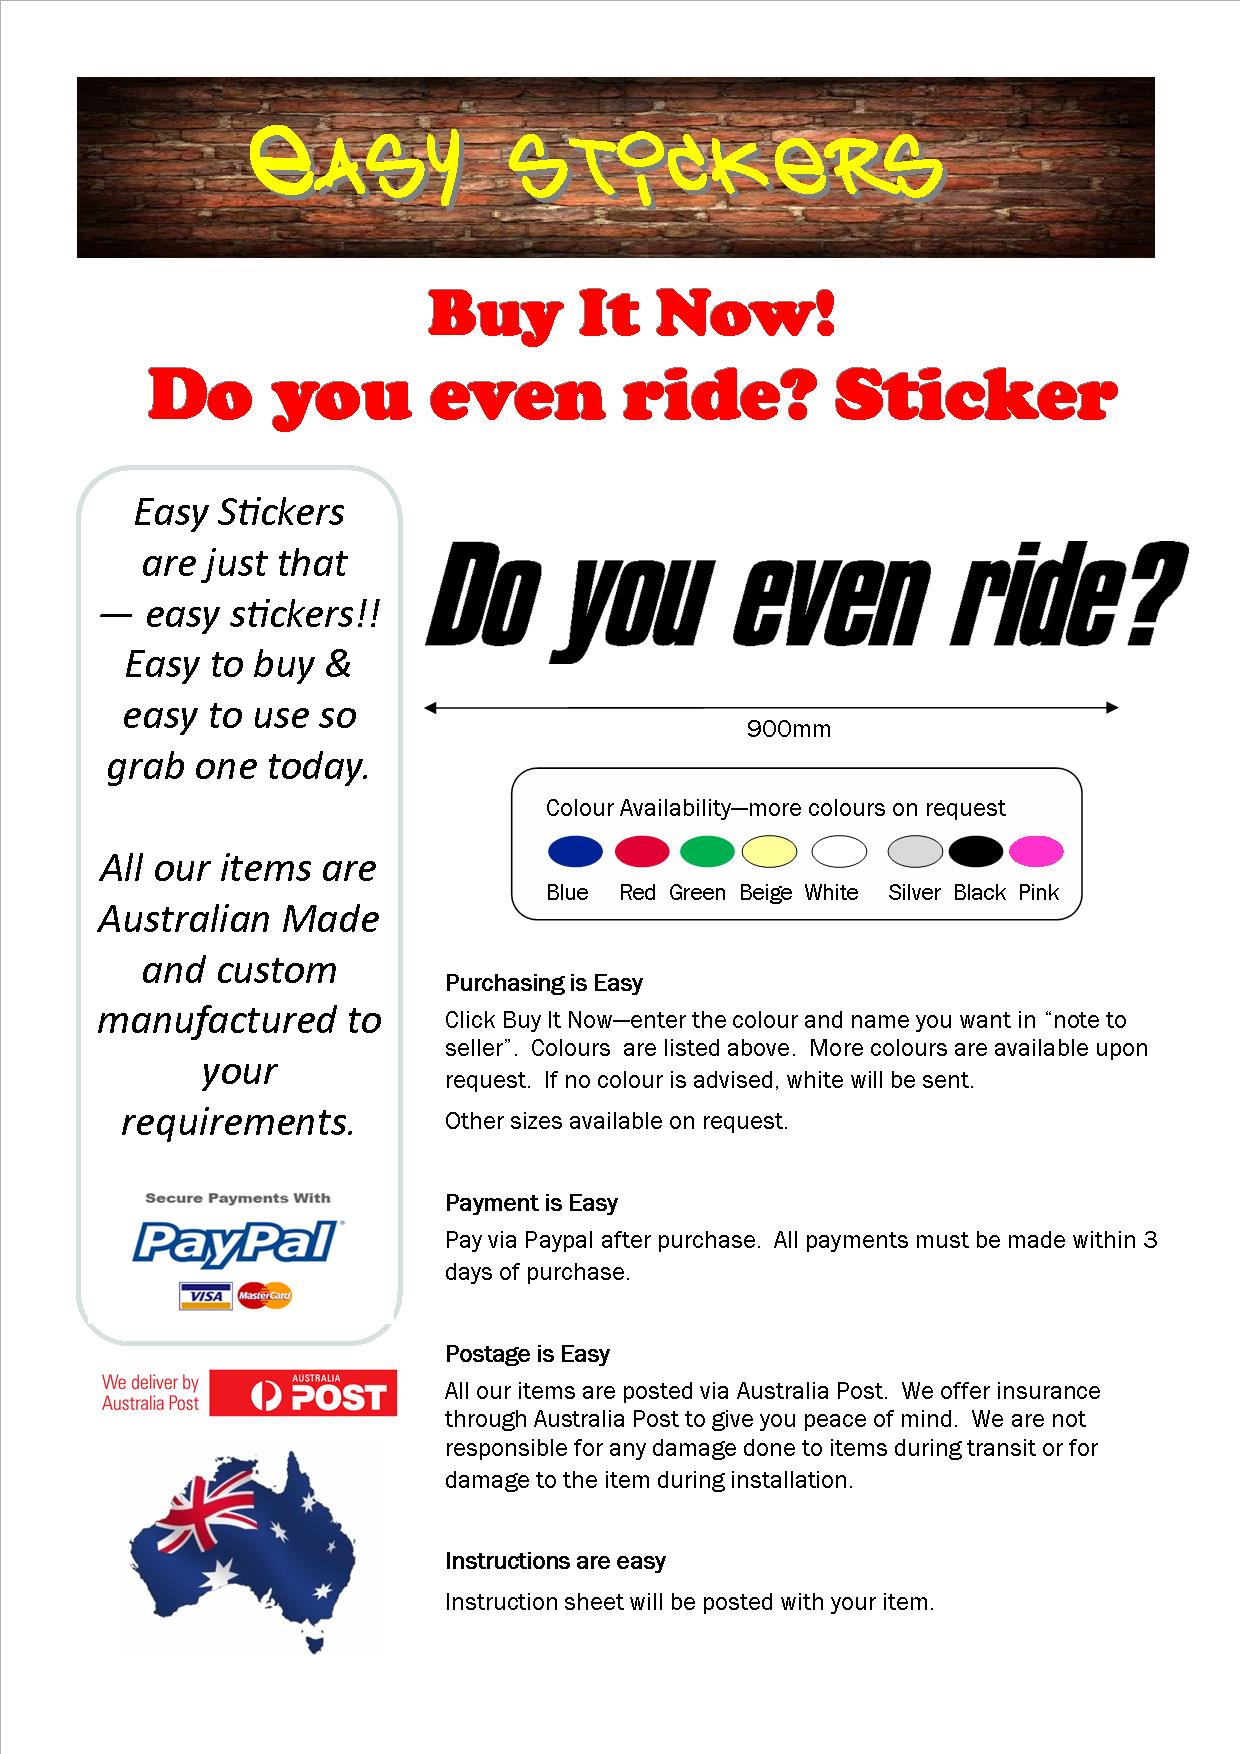 Ebay Template 900mm do you even ride.jpg  by easystickers